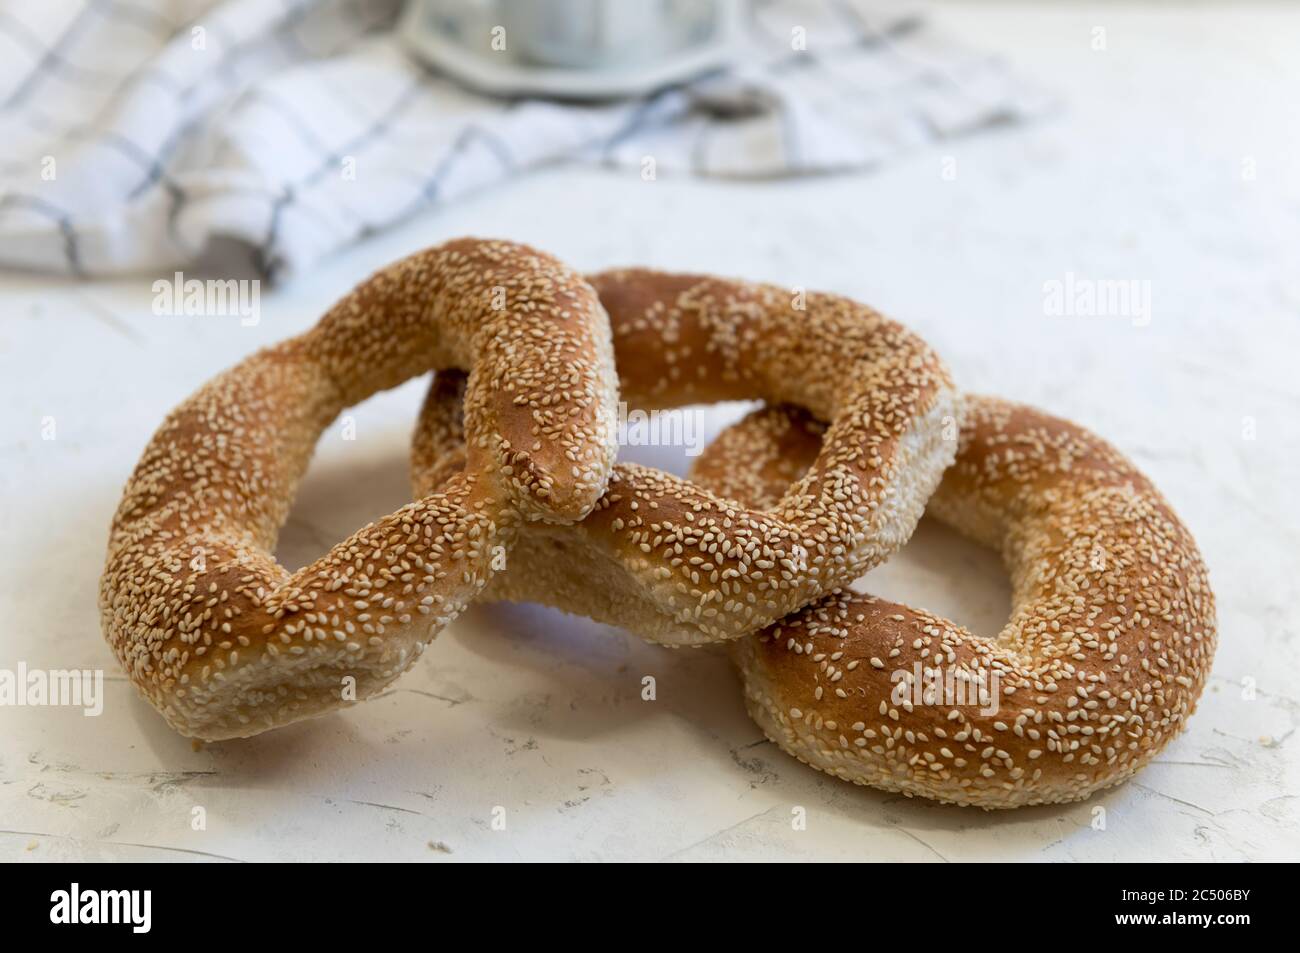 Turkish Simit bread encrusted with sesame seeds.Usually enjoyed with coffee. Stock Photo